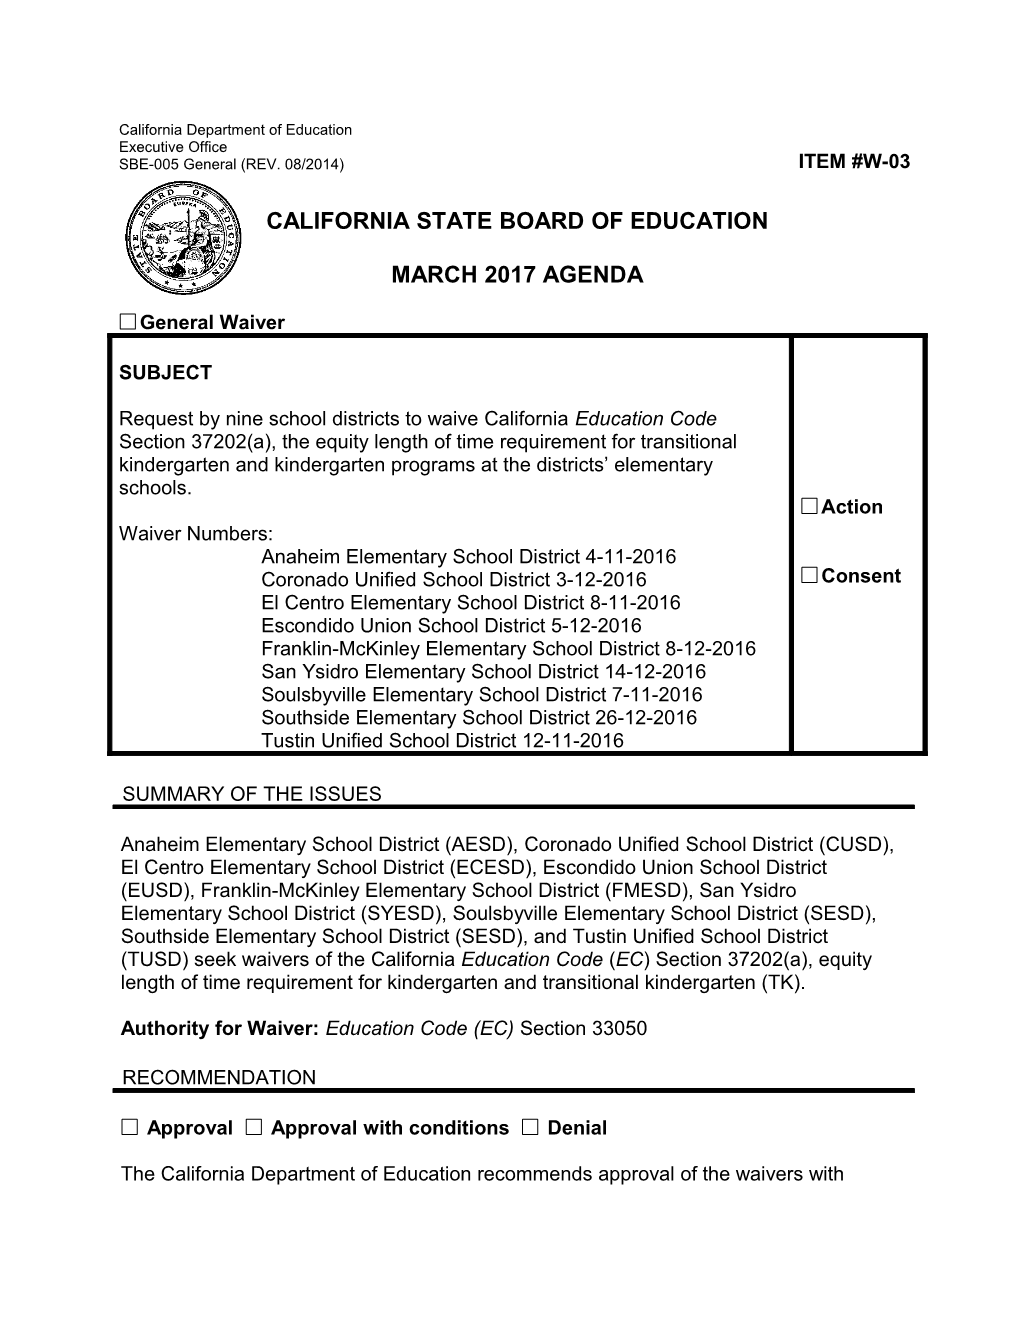 March 2017 Waiver Item W-03 - Meeting Agendas (CA State Board of Education)